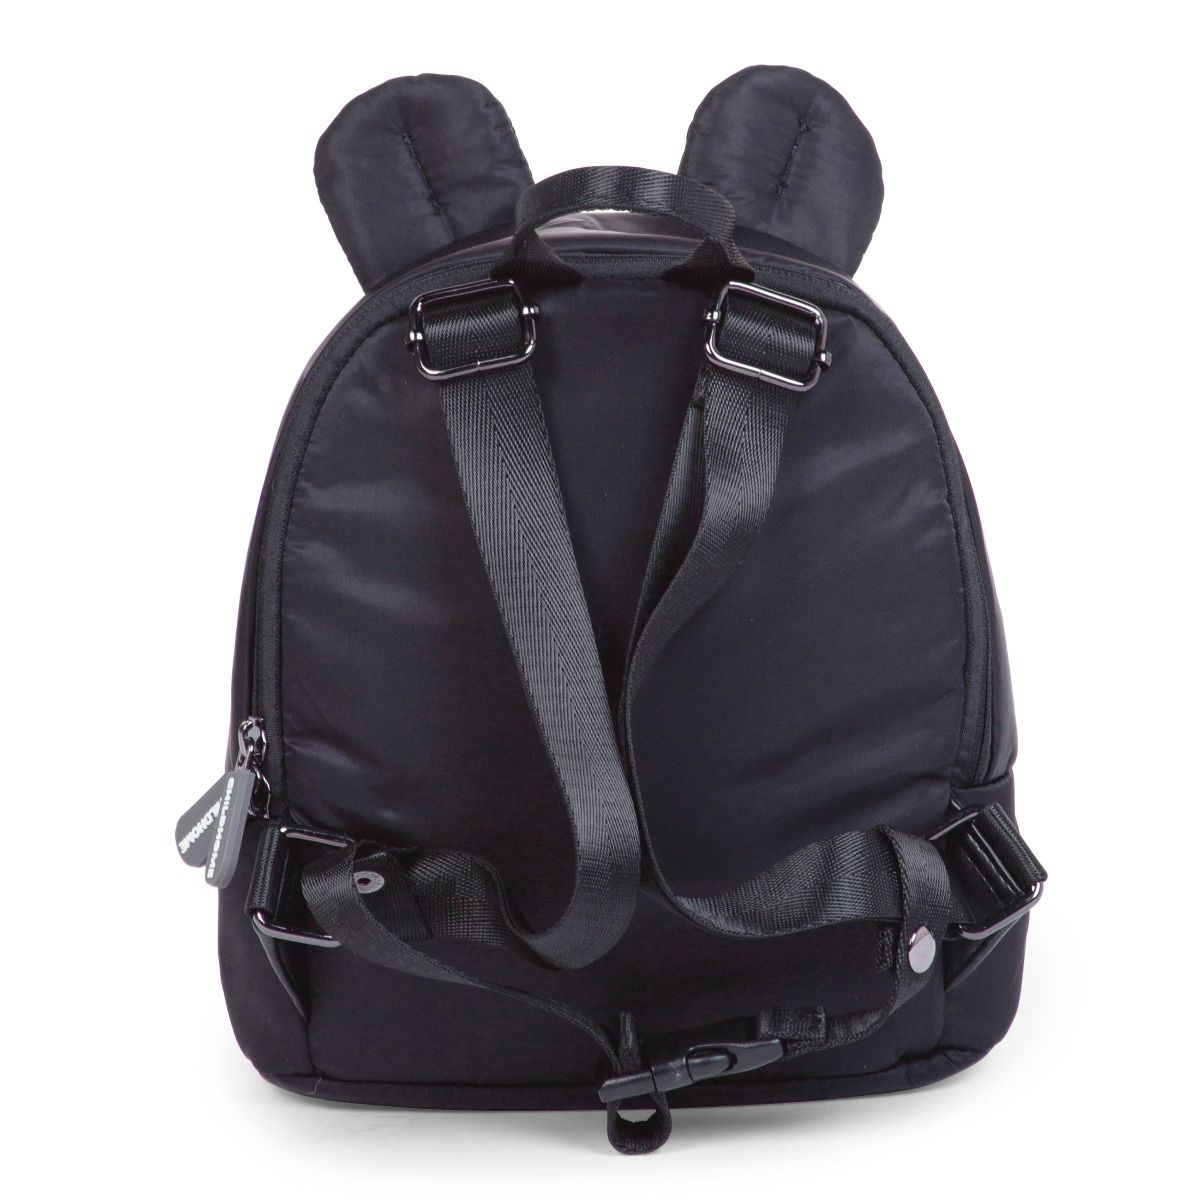 My first bag children's backpack - Puffered Black